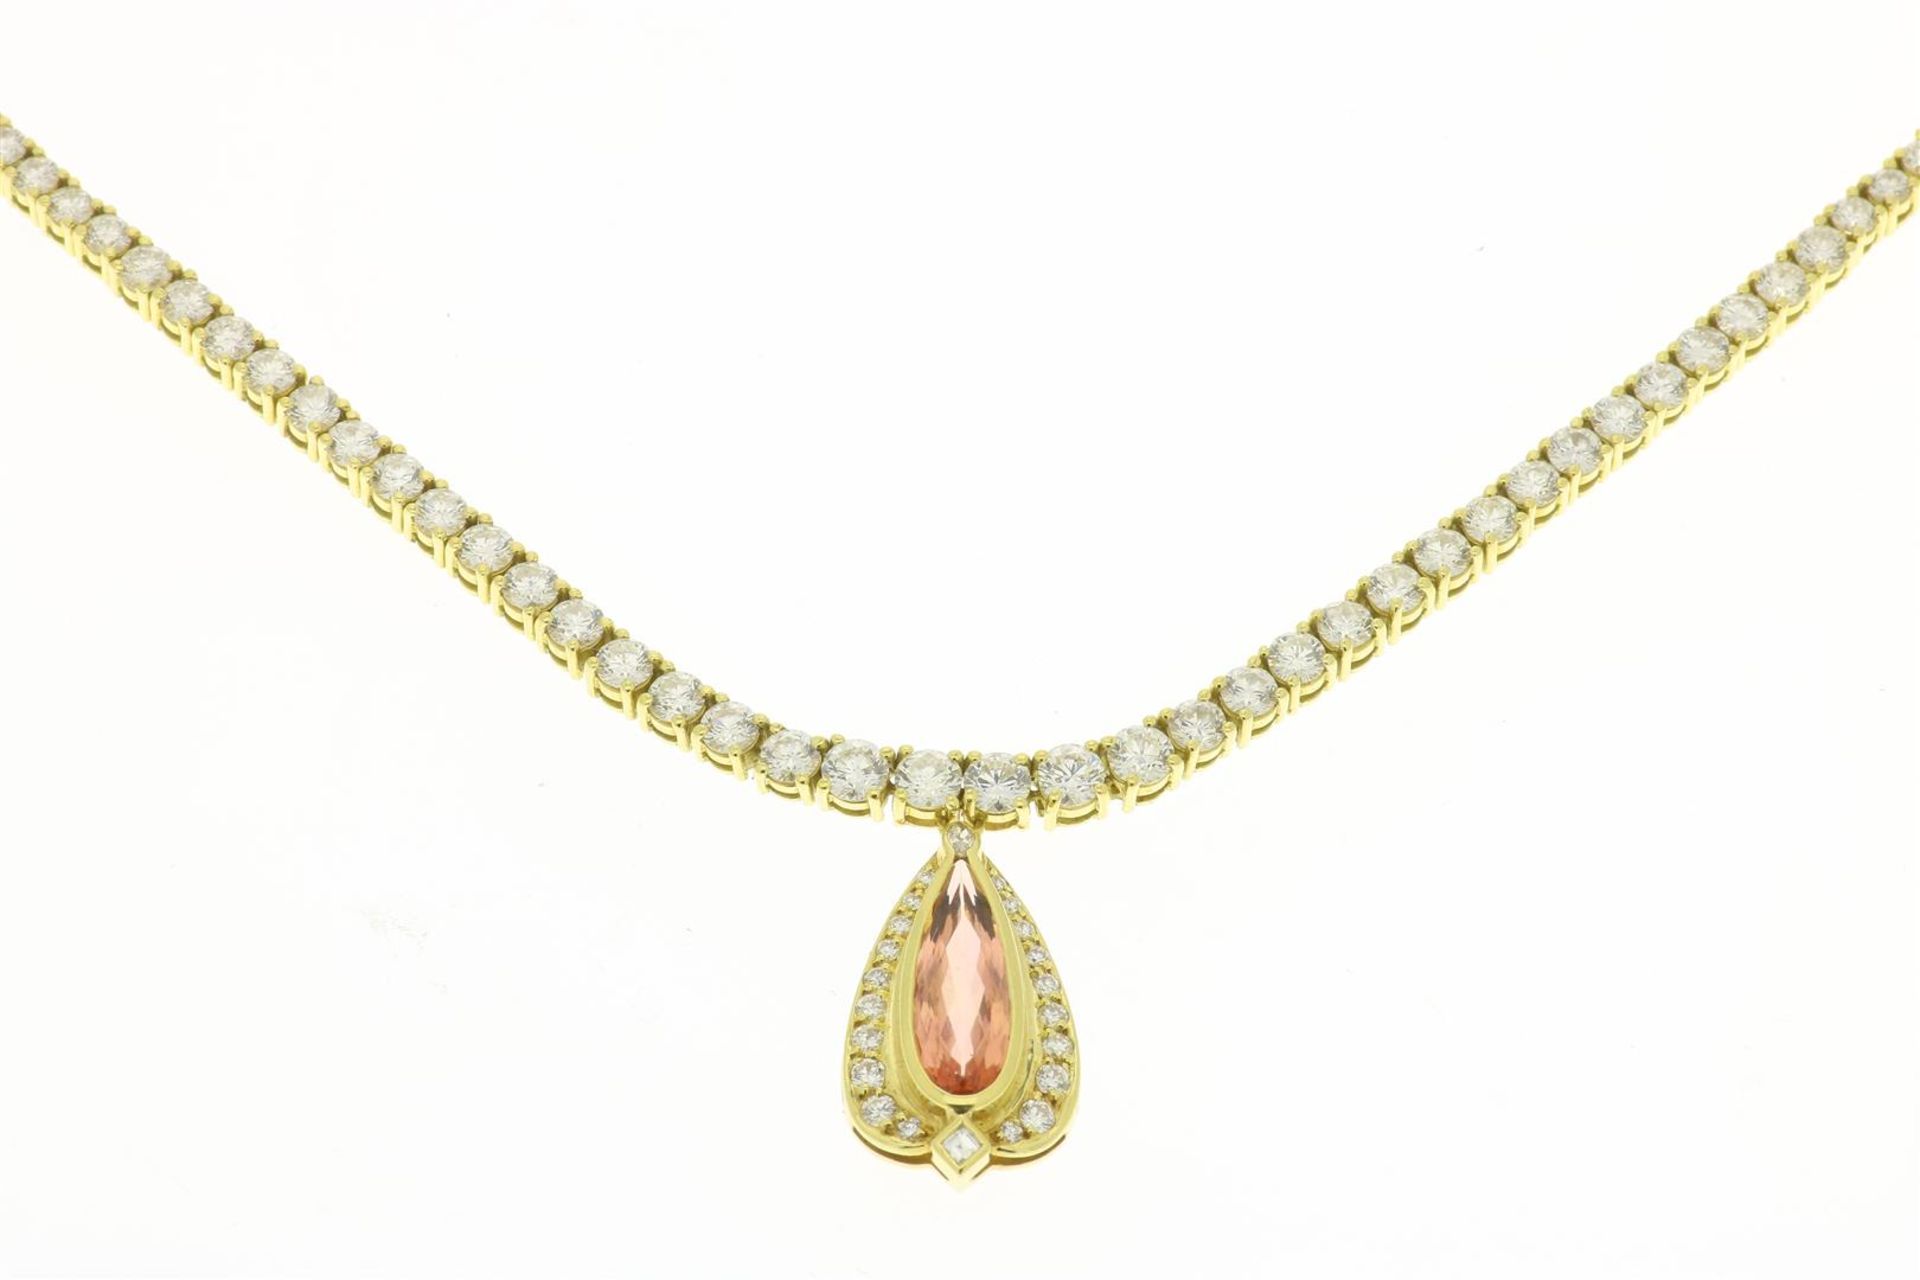 Yellow gold tennis necklace set with brilliant cut diamonds